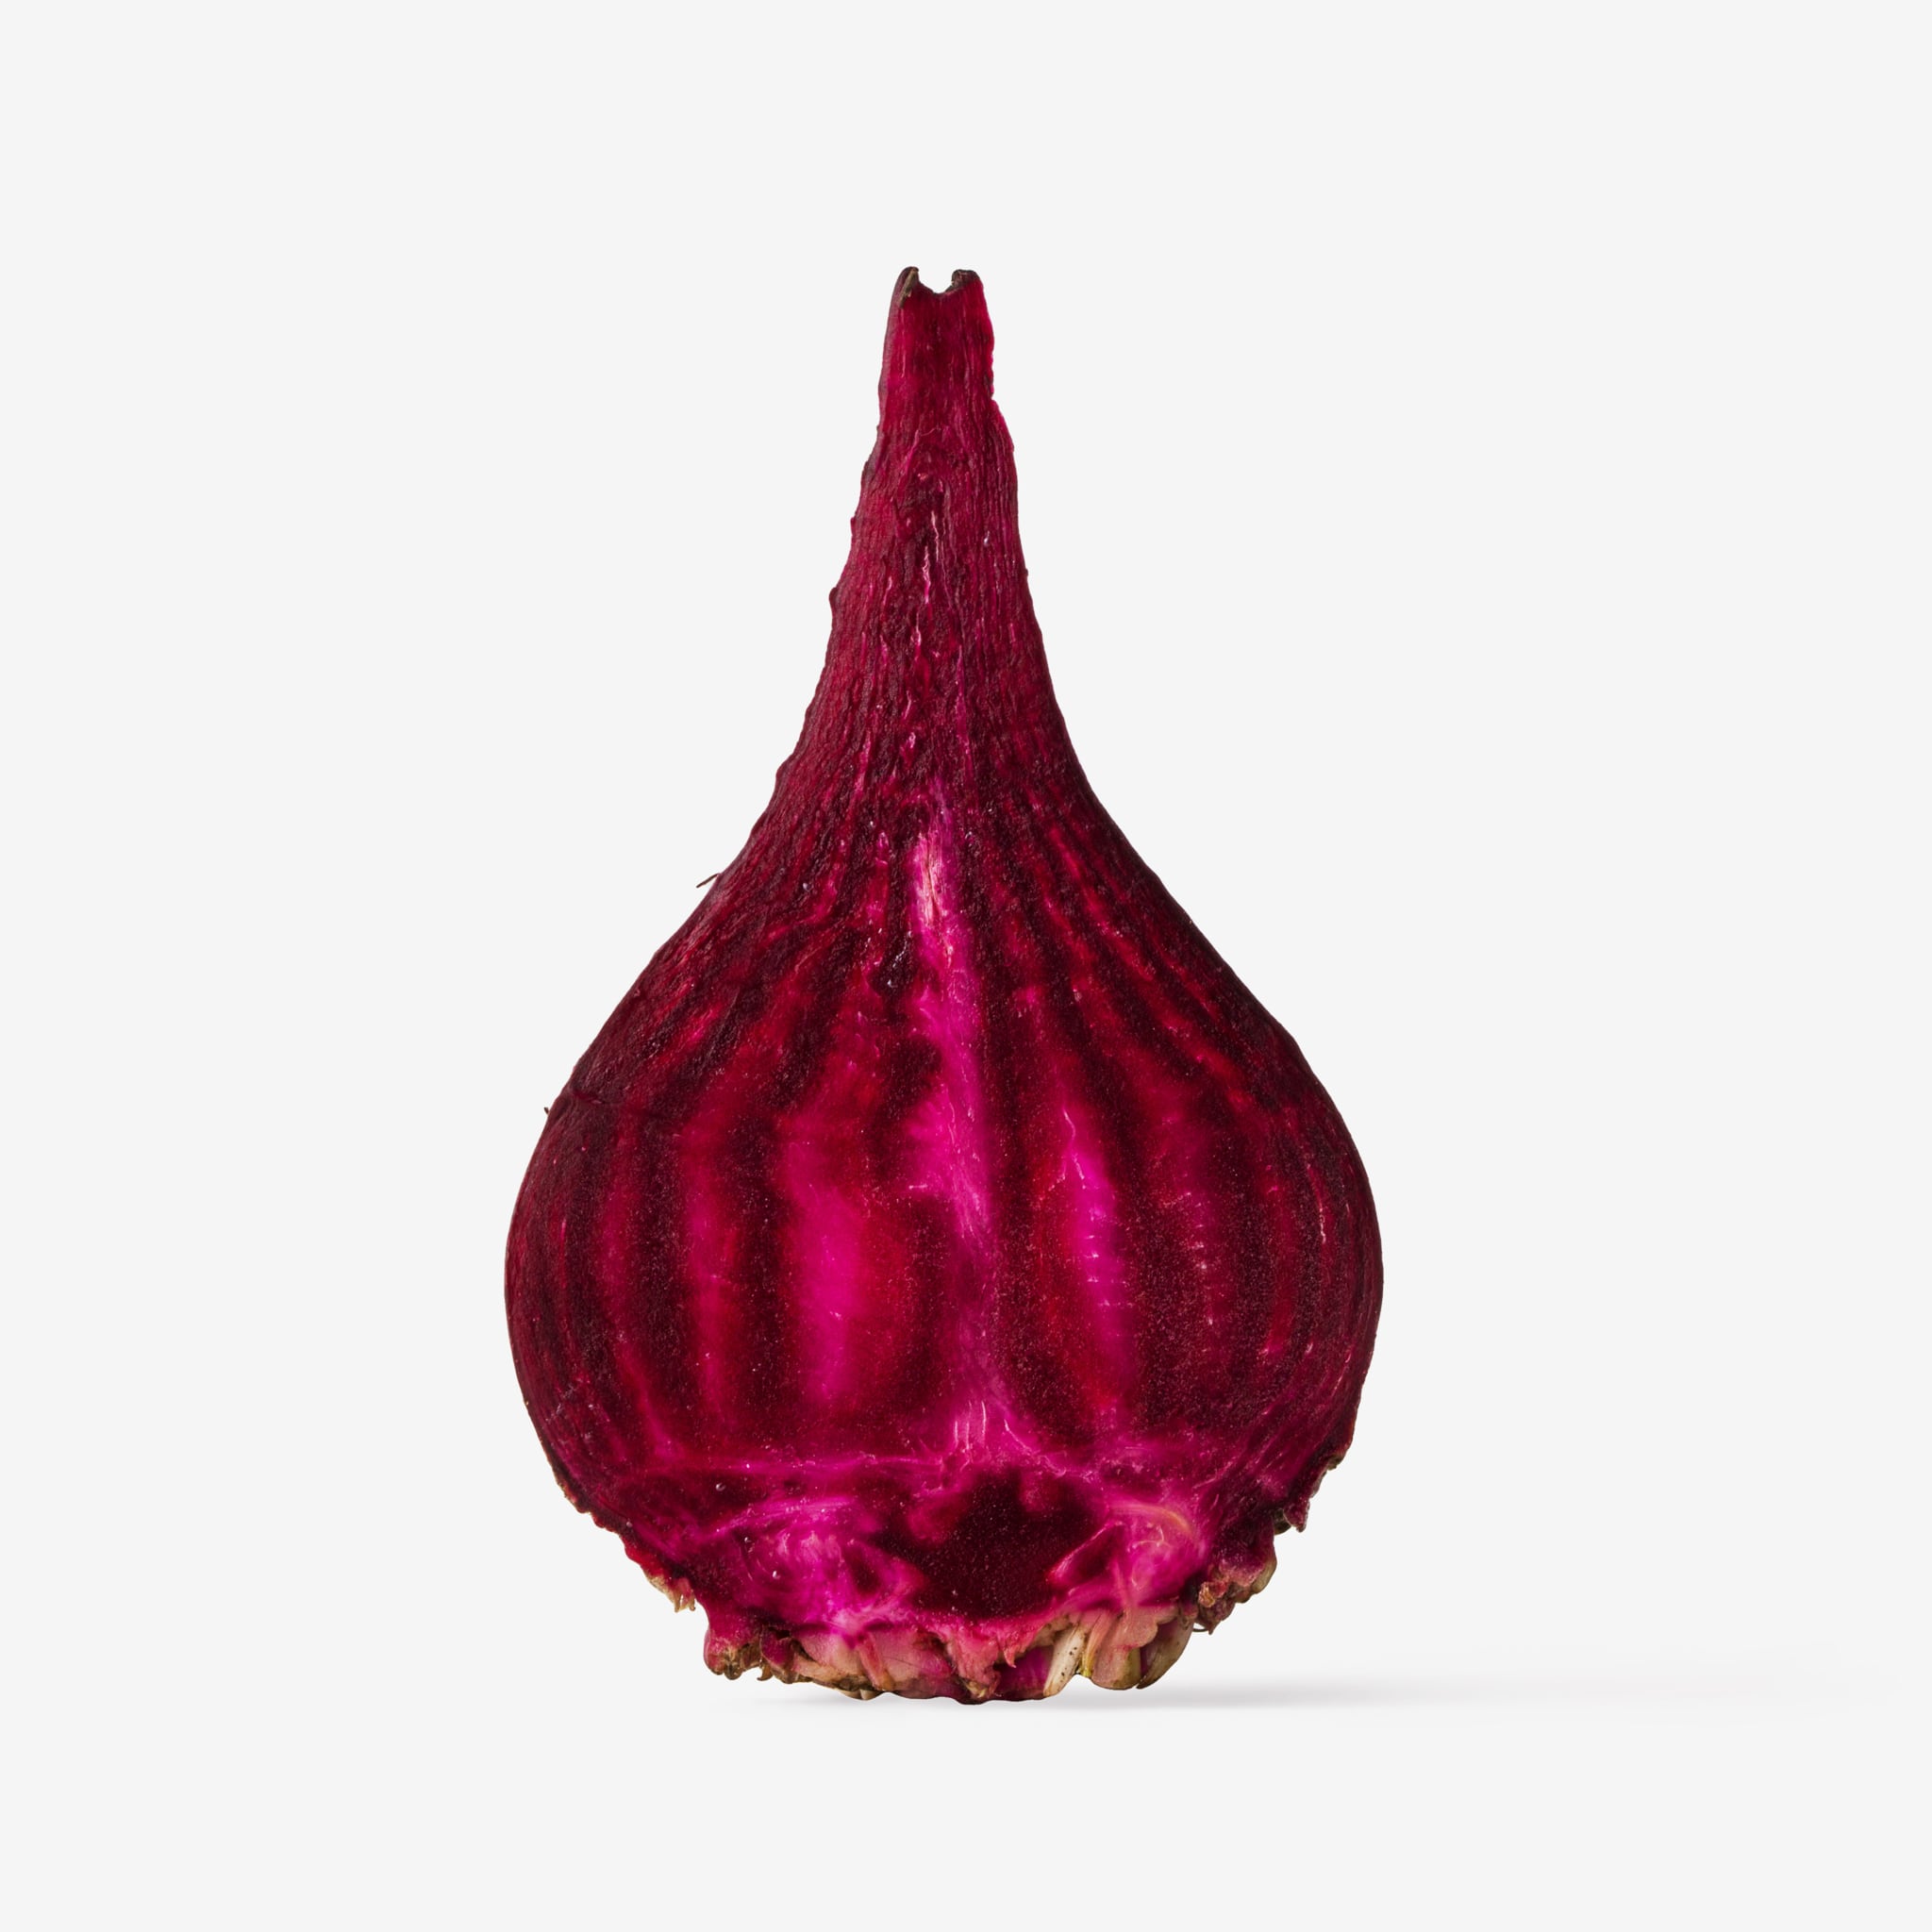 Beet image with transparent background